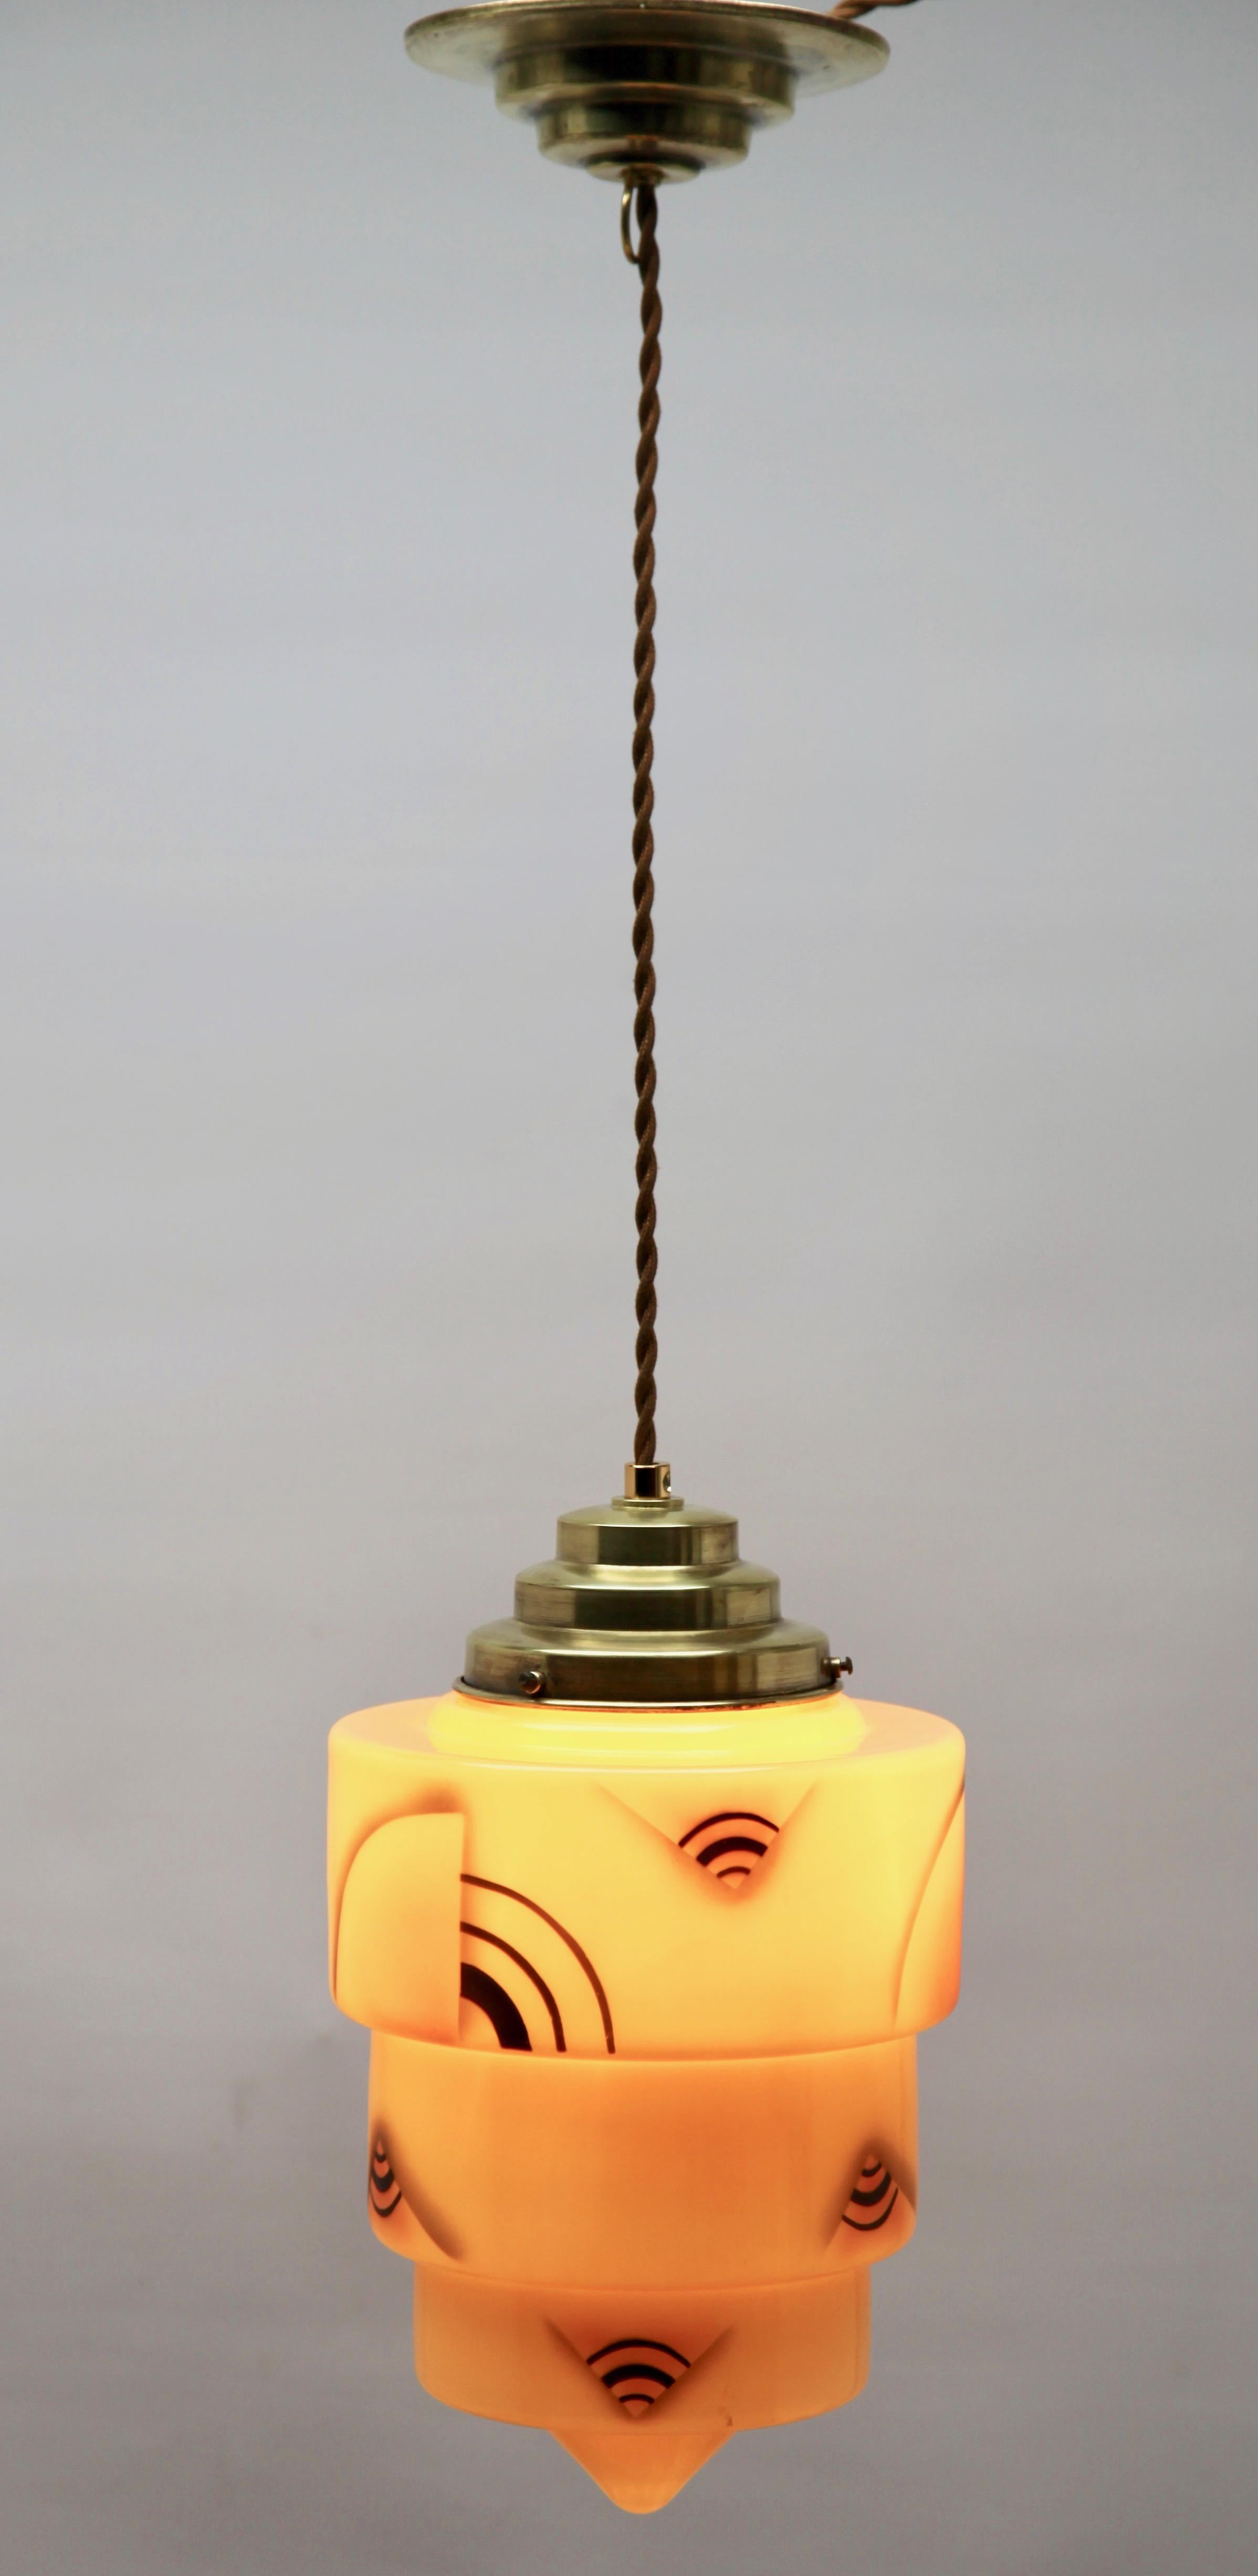 Art Deco ceiling lamp

Photography fails to capture the simple elegant illumination provided by this lamp.

Fitting messing pendant ceiling light with screw fixing to hold a stylish Belgian Art Deco lampshade. Good distribution of darker and